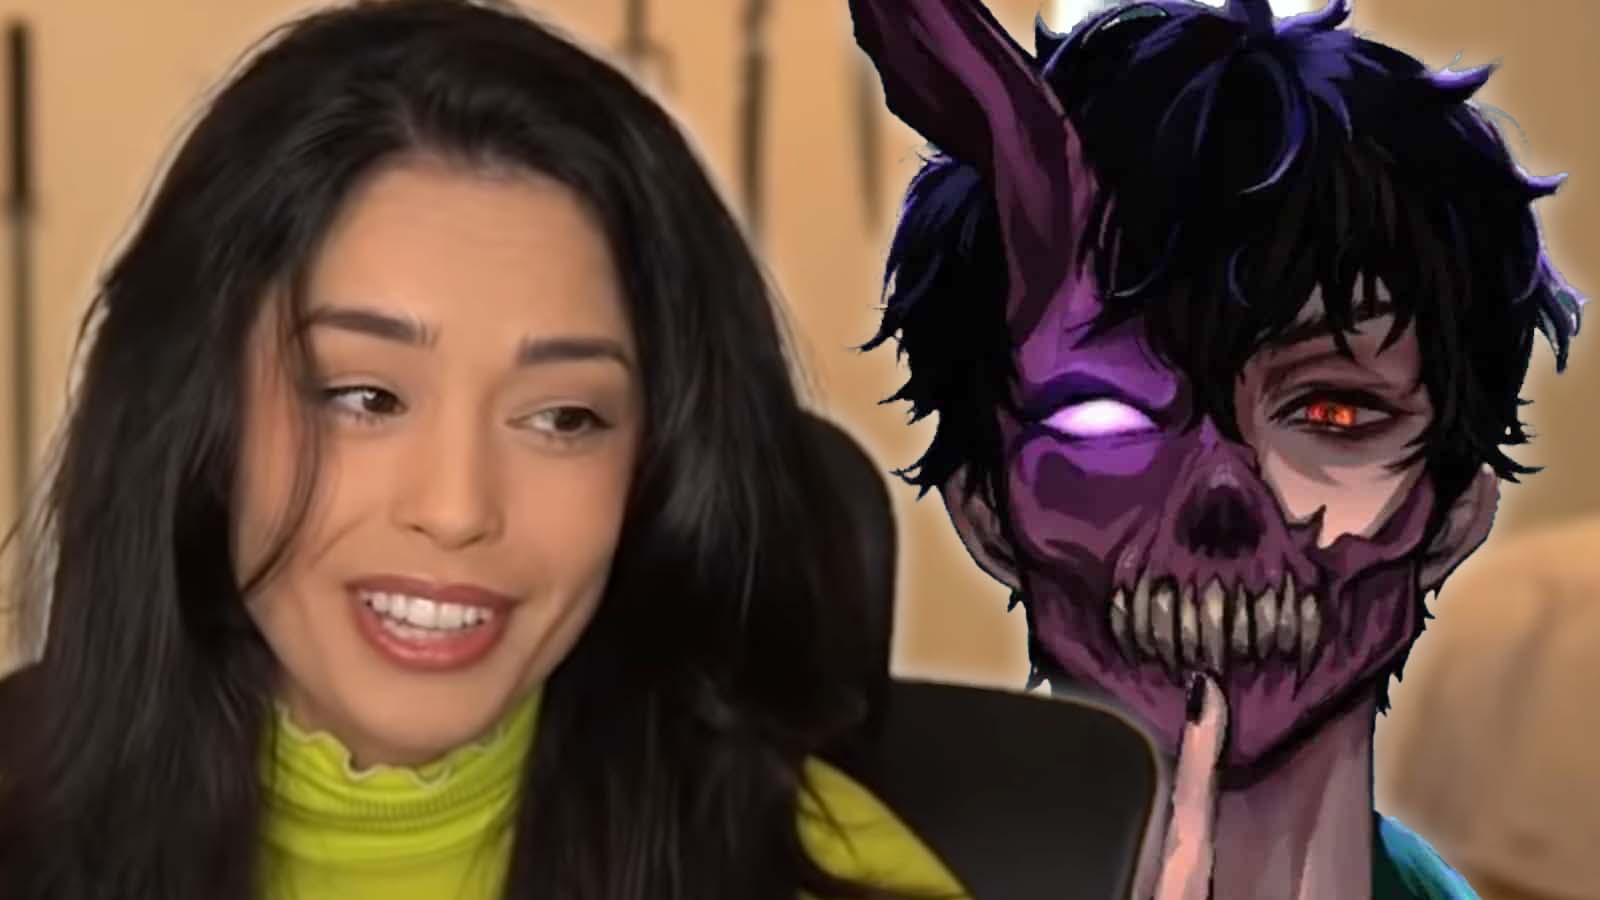 valkyrae reveals why corpse has been missing from streams